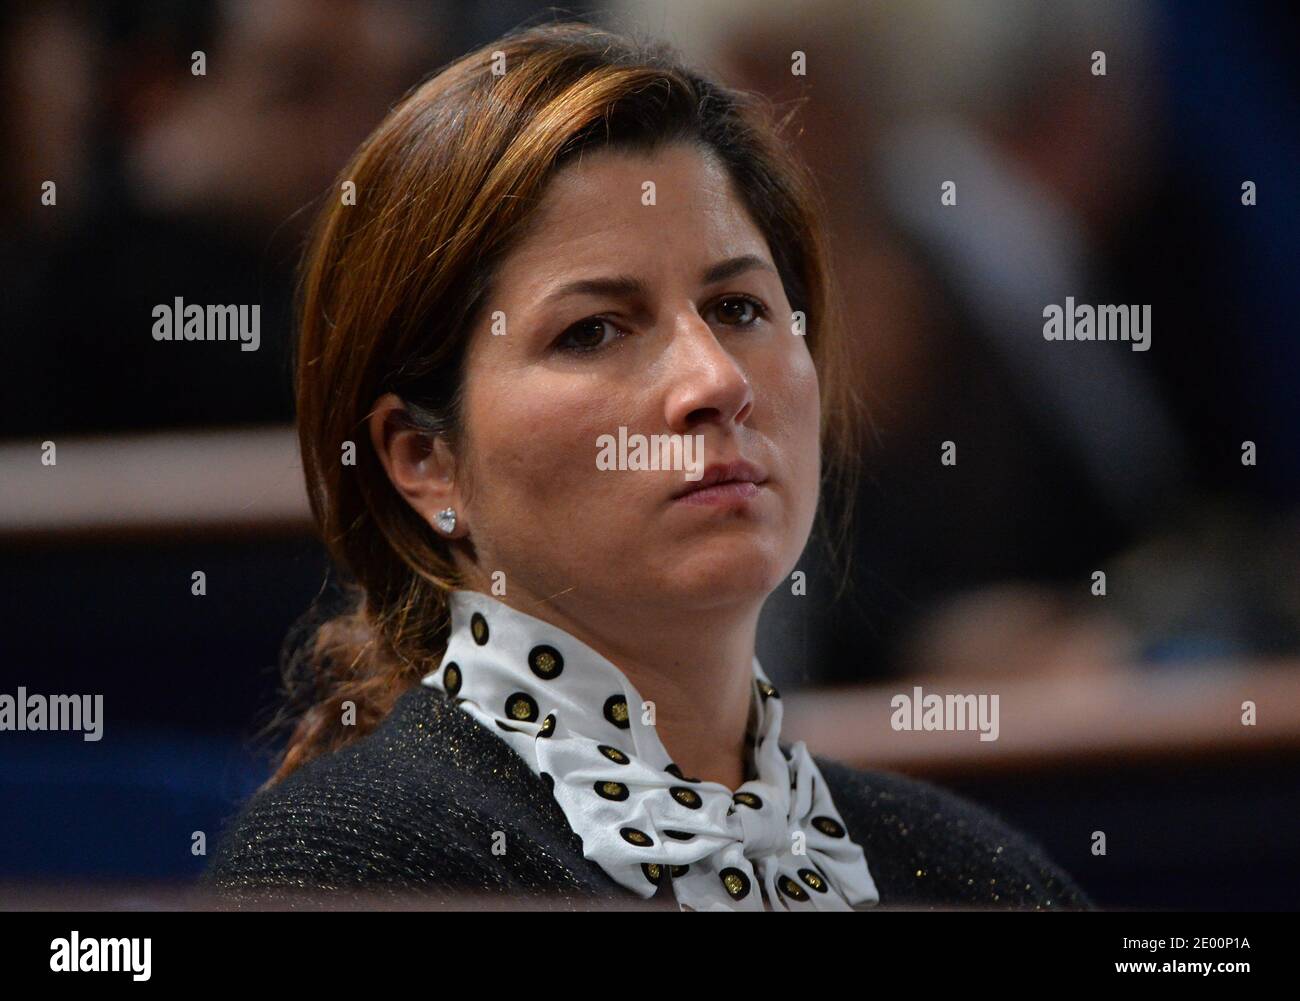 Roger Federer wife Mirka Vavrinec attends the BNP Paribas Masters Series Tennis Open 2013 at Palais Omnisports of Paris-Bercy in Paris, France on October 31st, 2013.photo by Christian Liewig/ABACAPRESS.COM Stock Photo